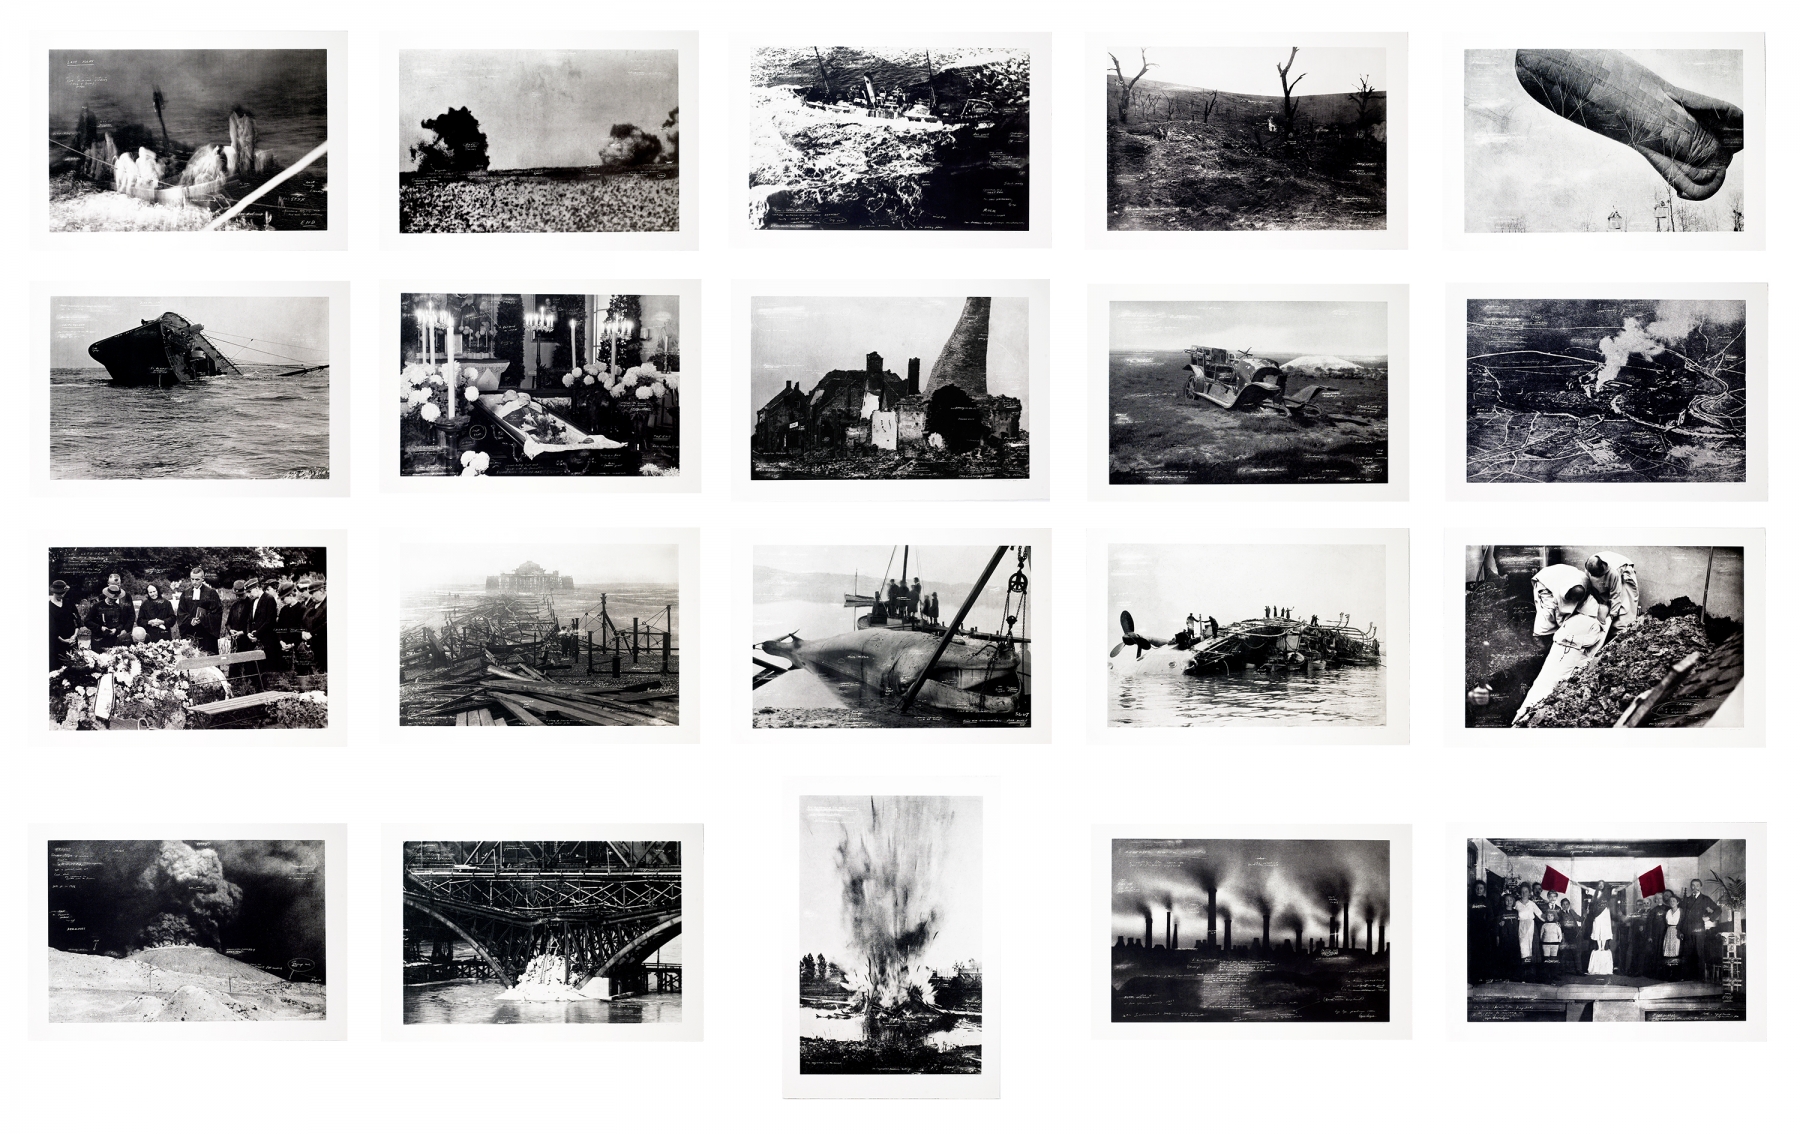 Tacita Dean
The Russian Ending,&nbsp;2001
Portfolio of&nbsp;20 photogravure etchings
21 x 31 inches (54 x 79.4 cm), each
Edition of 35 + proofs

Inquire